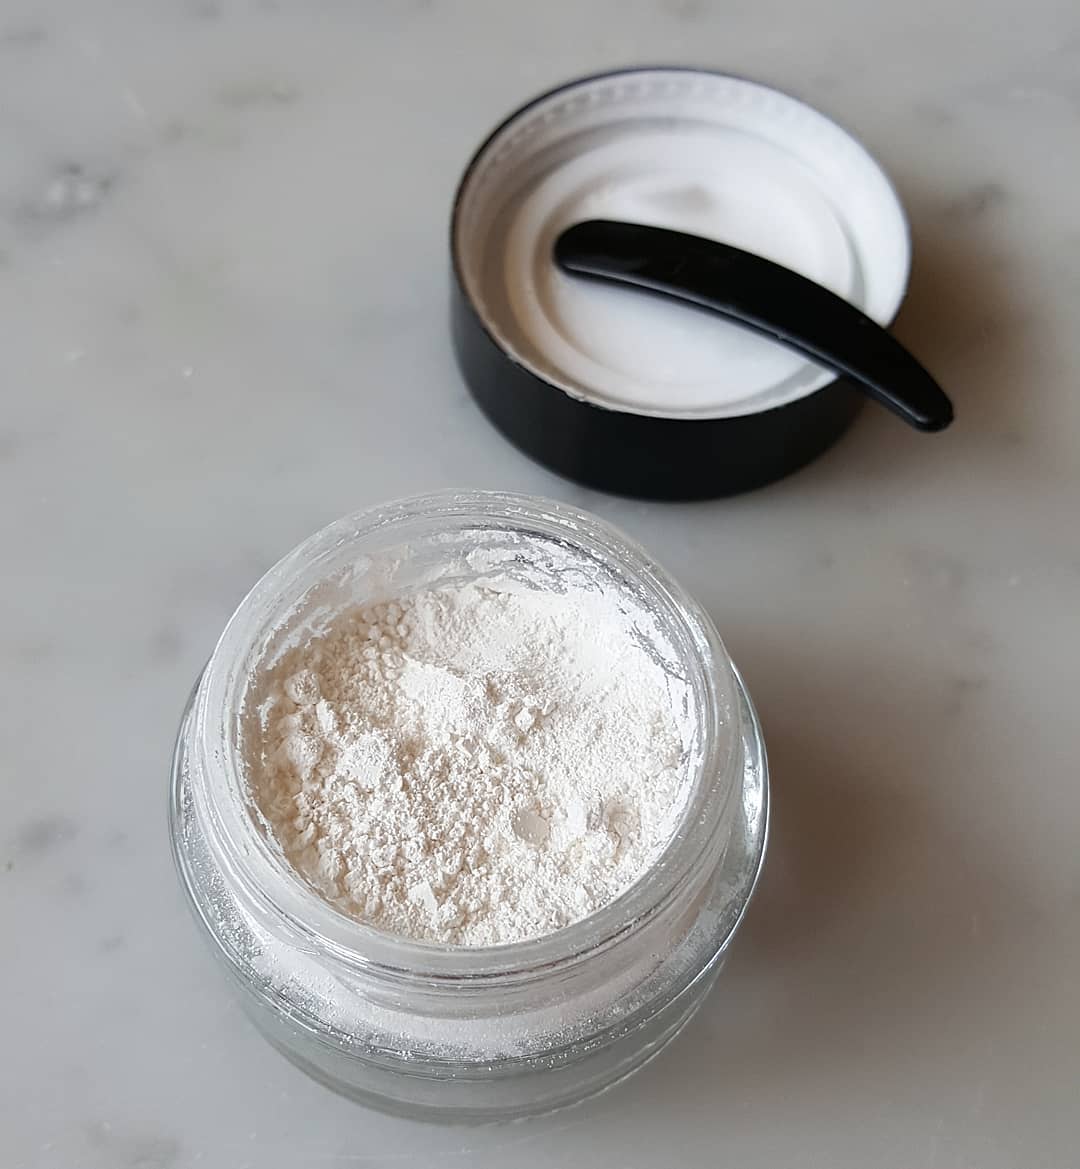 How To Pearl Powder Based On Your Skin Type – Moroccan Natural